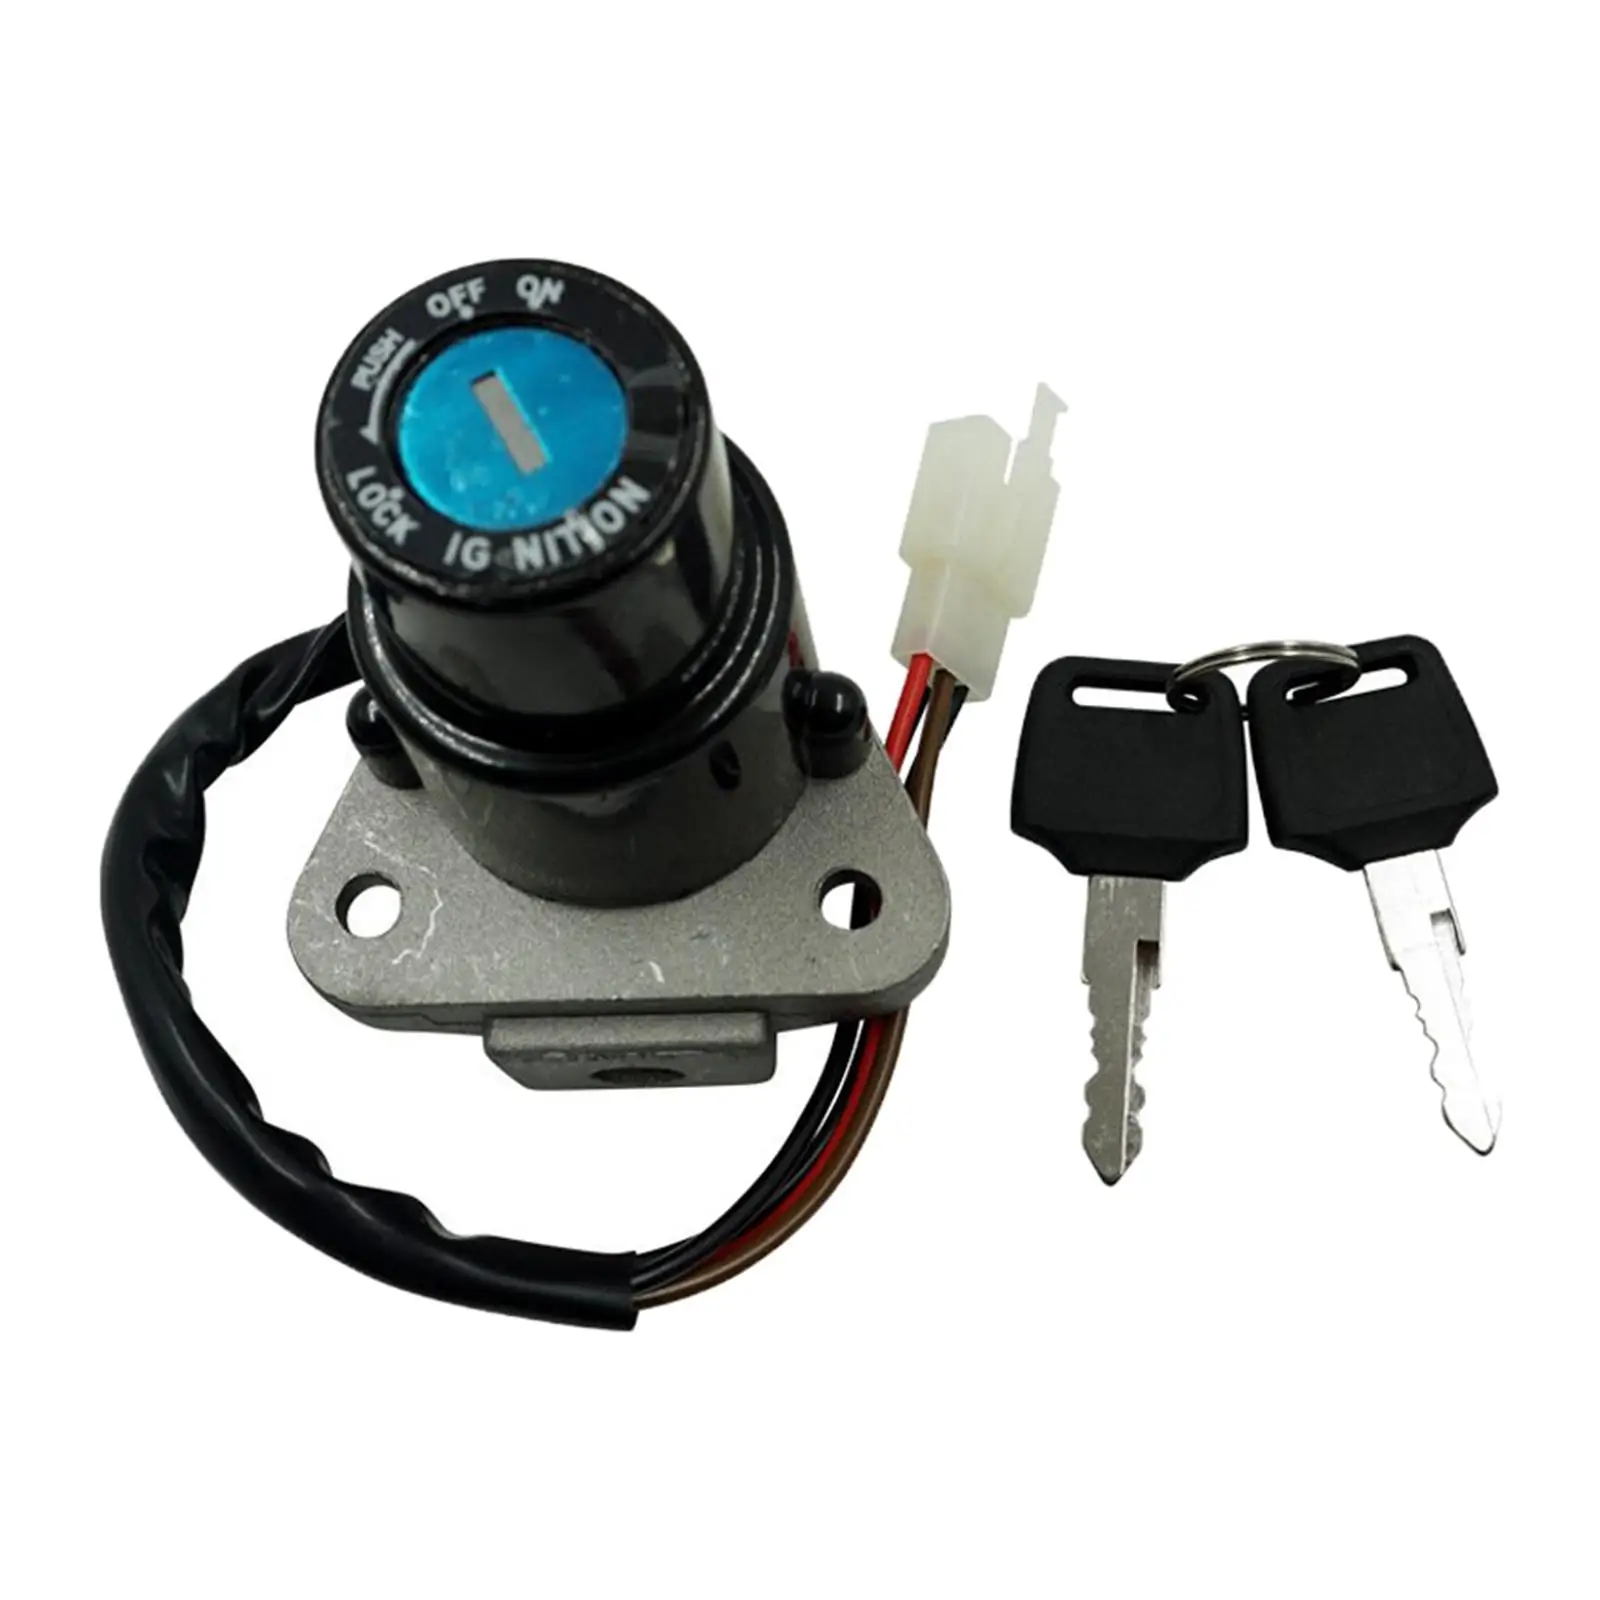 Motorbike Ignition Switch Key Accessories Fit for DT125 Tzr250 TW225